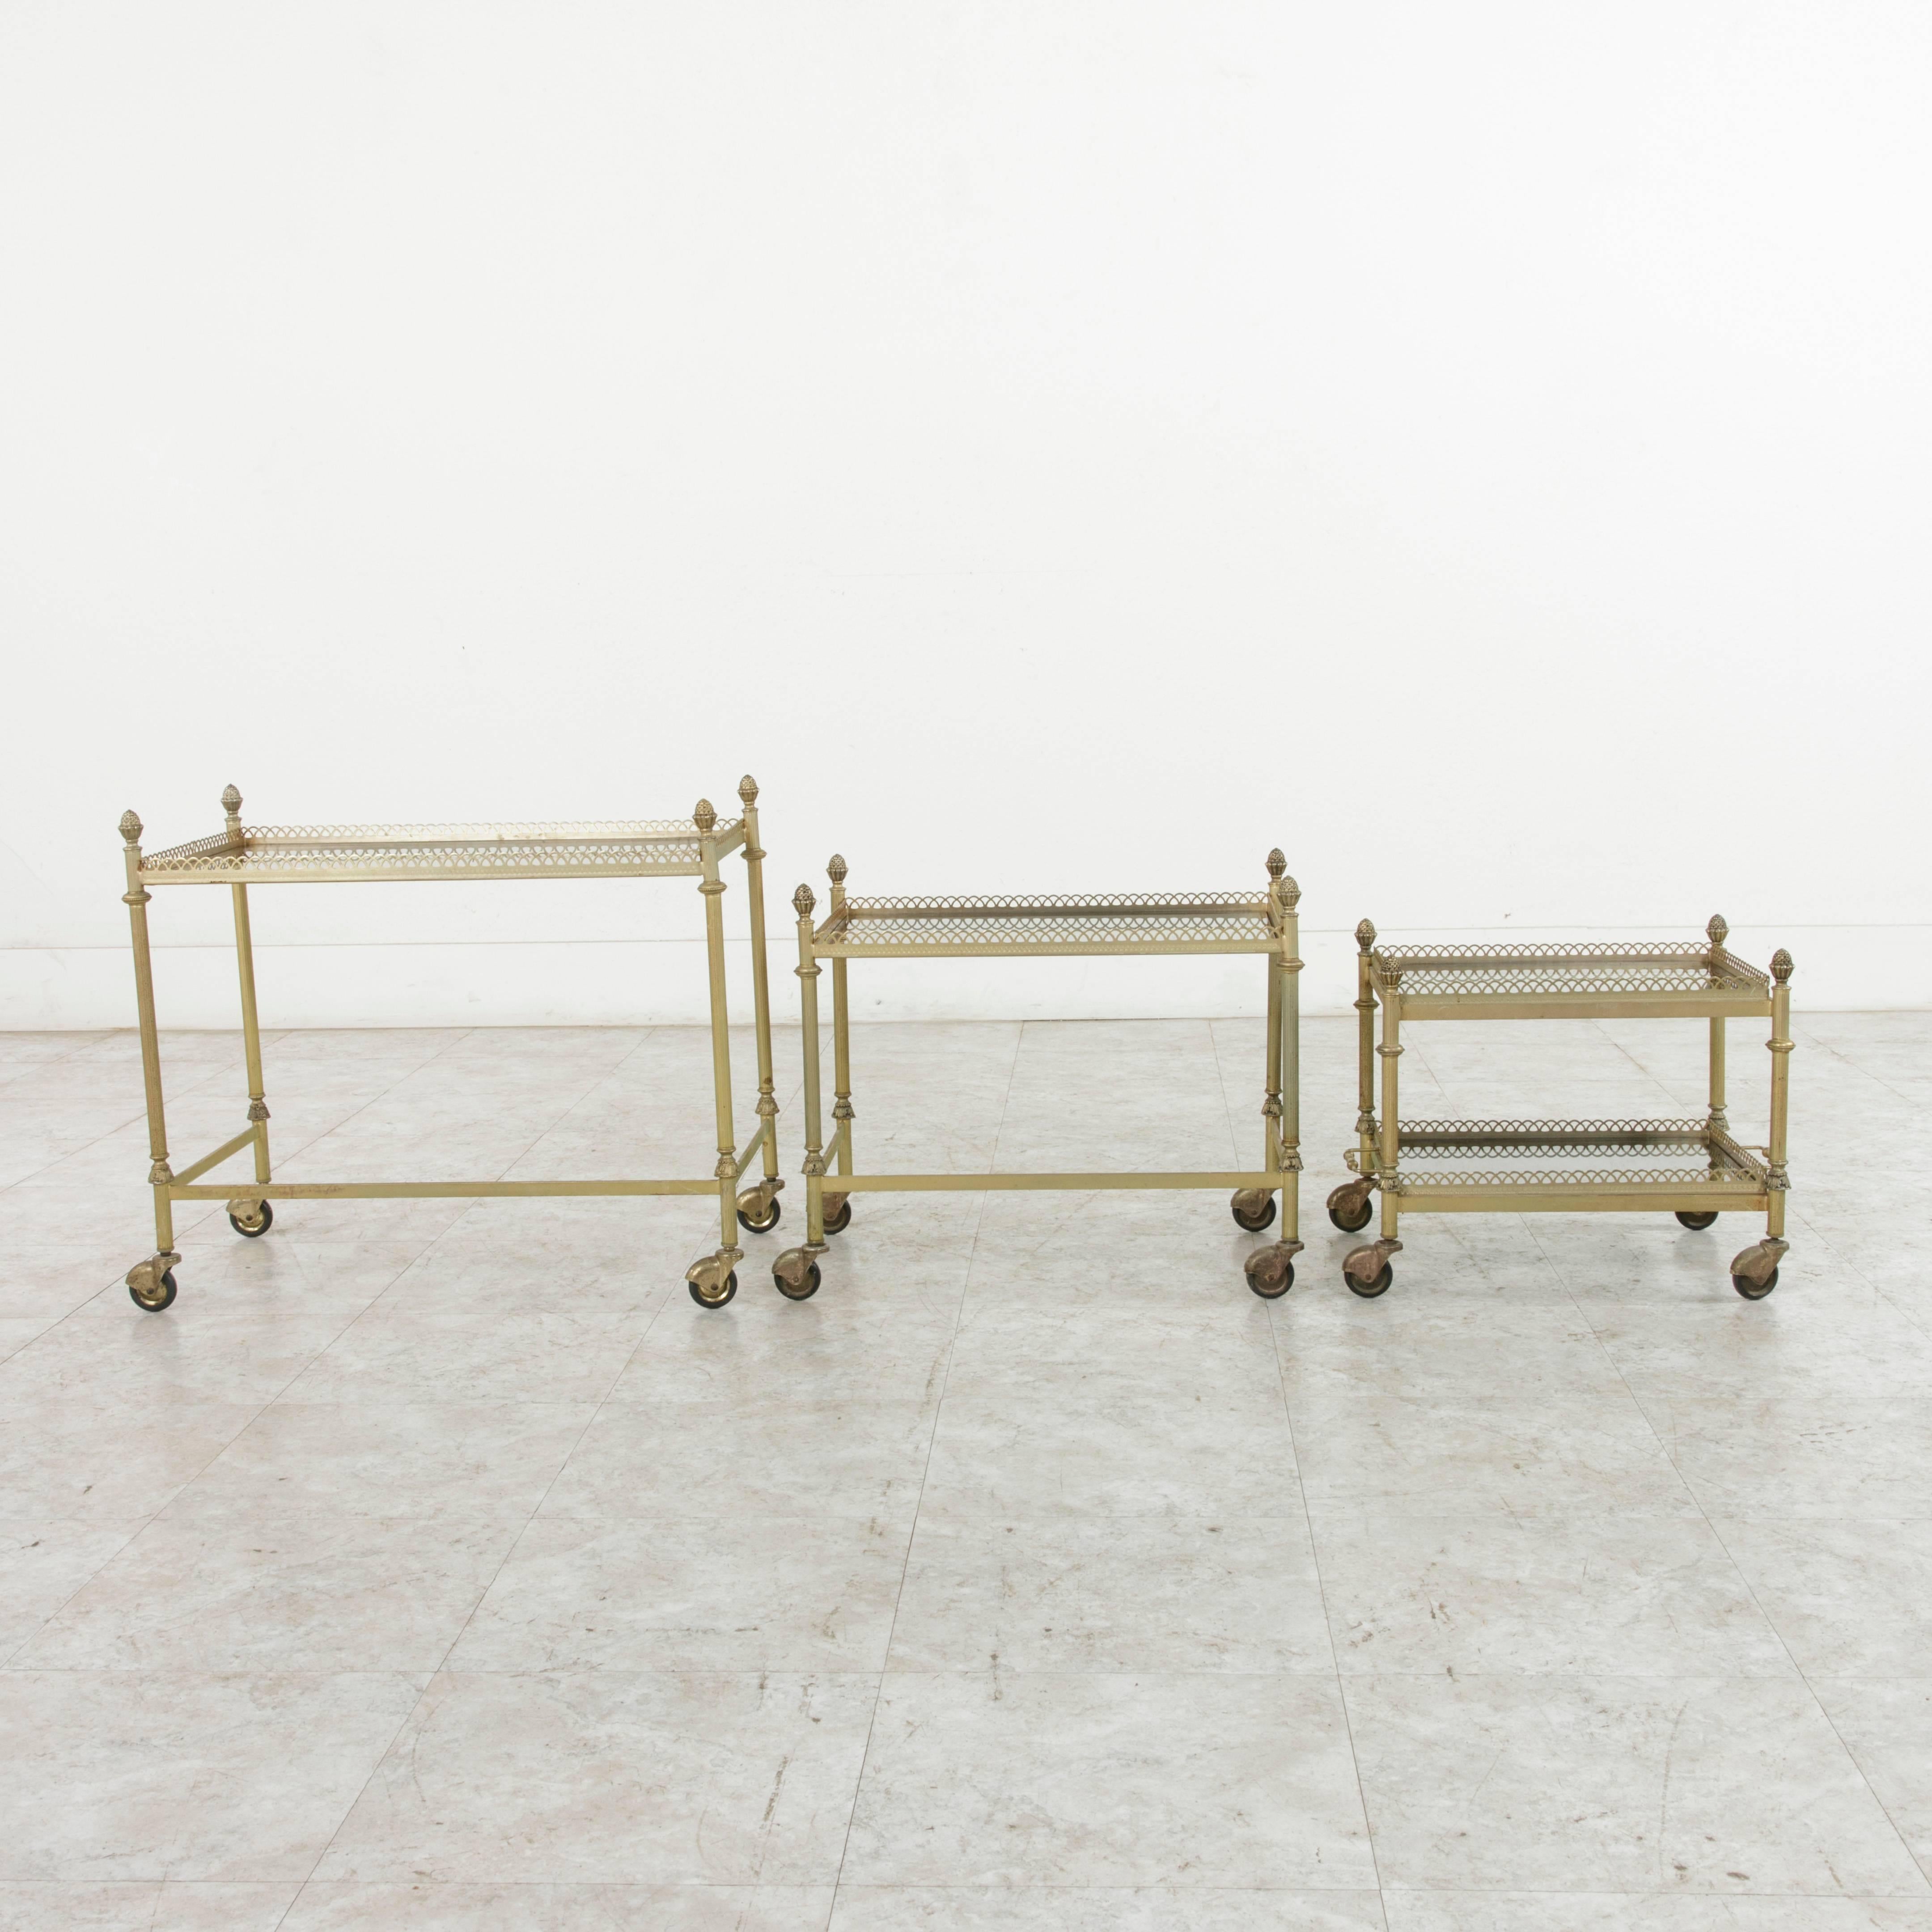 Set of Three Mid-20th Century French Bronze Nesting Tables with Glass Trays For Sale 1